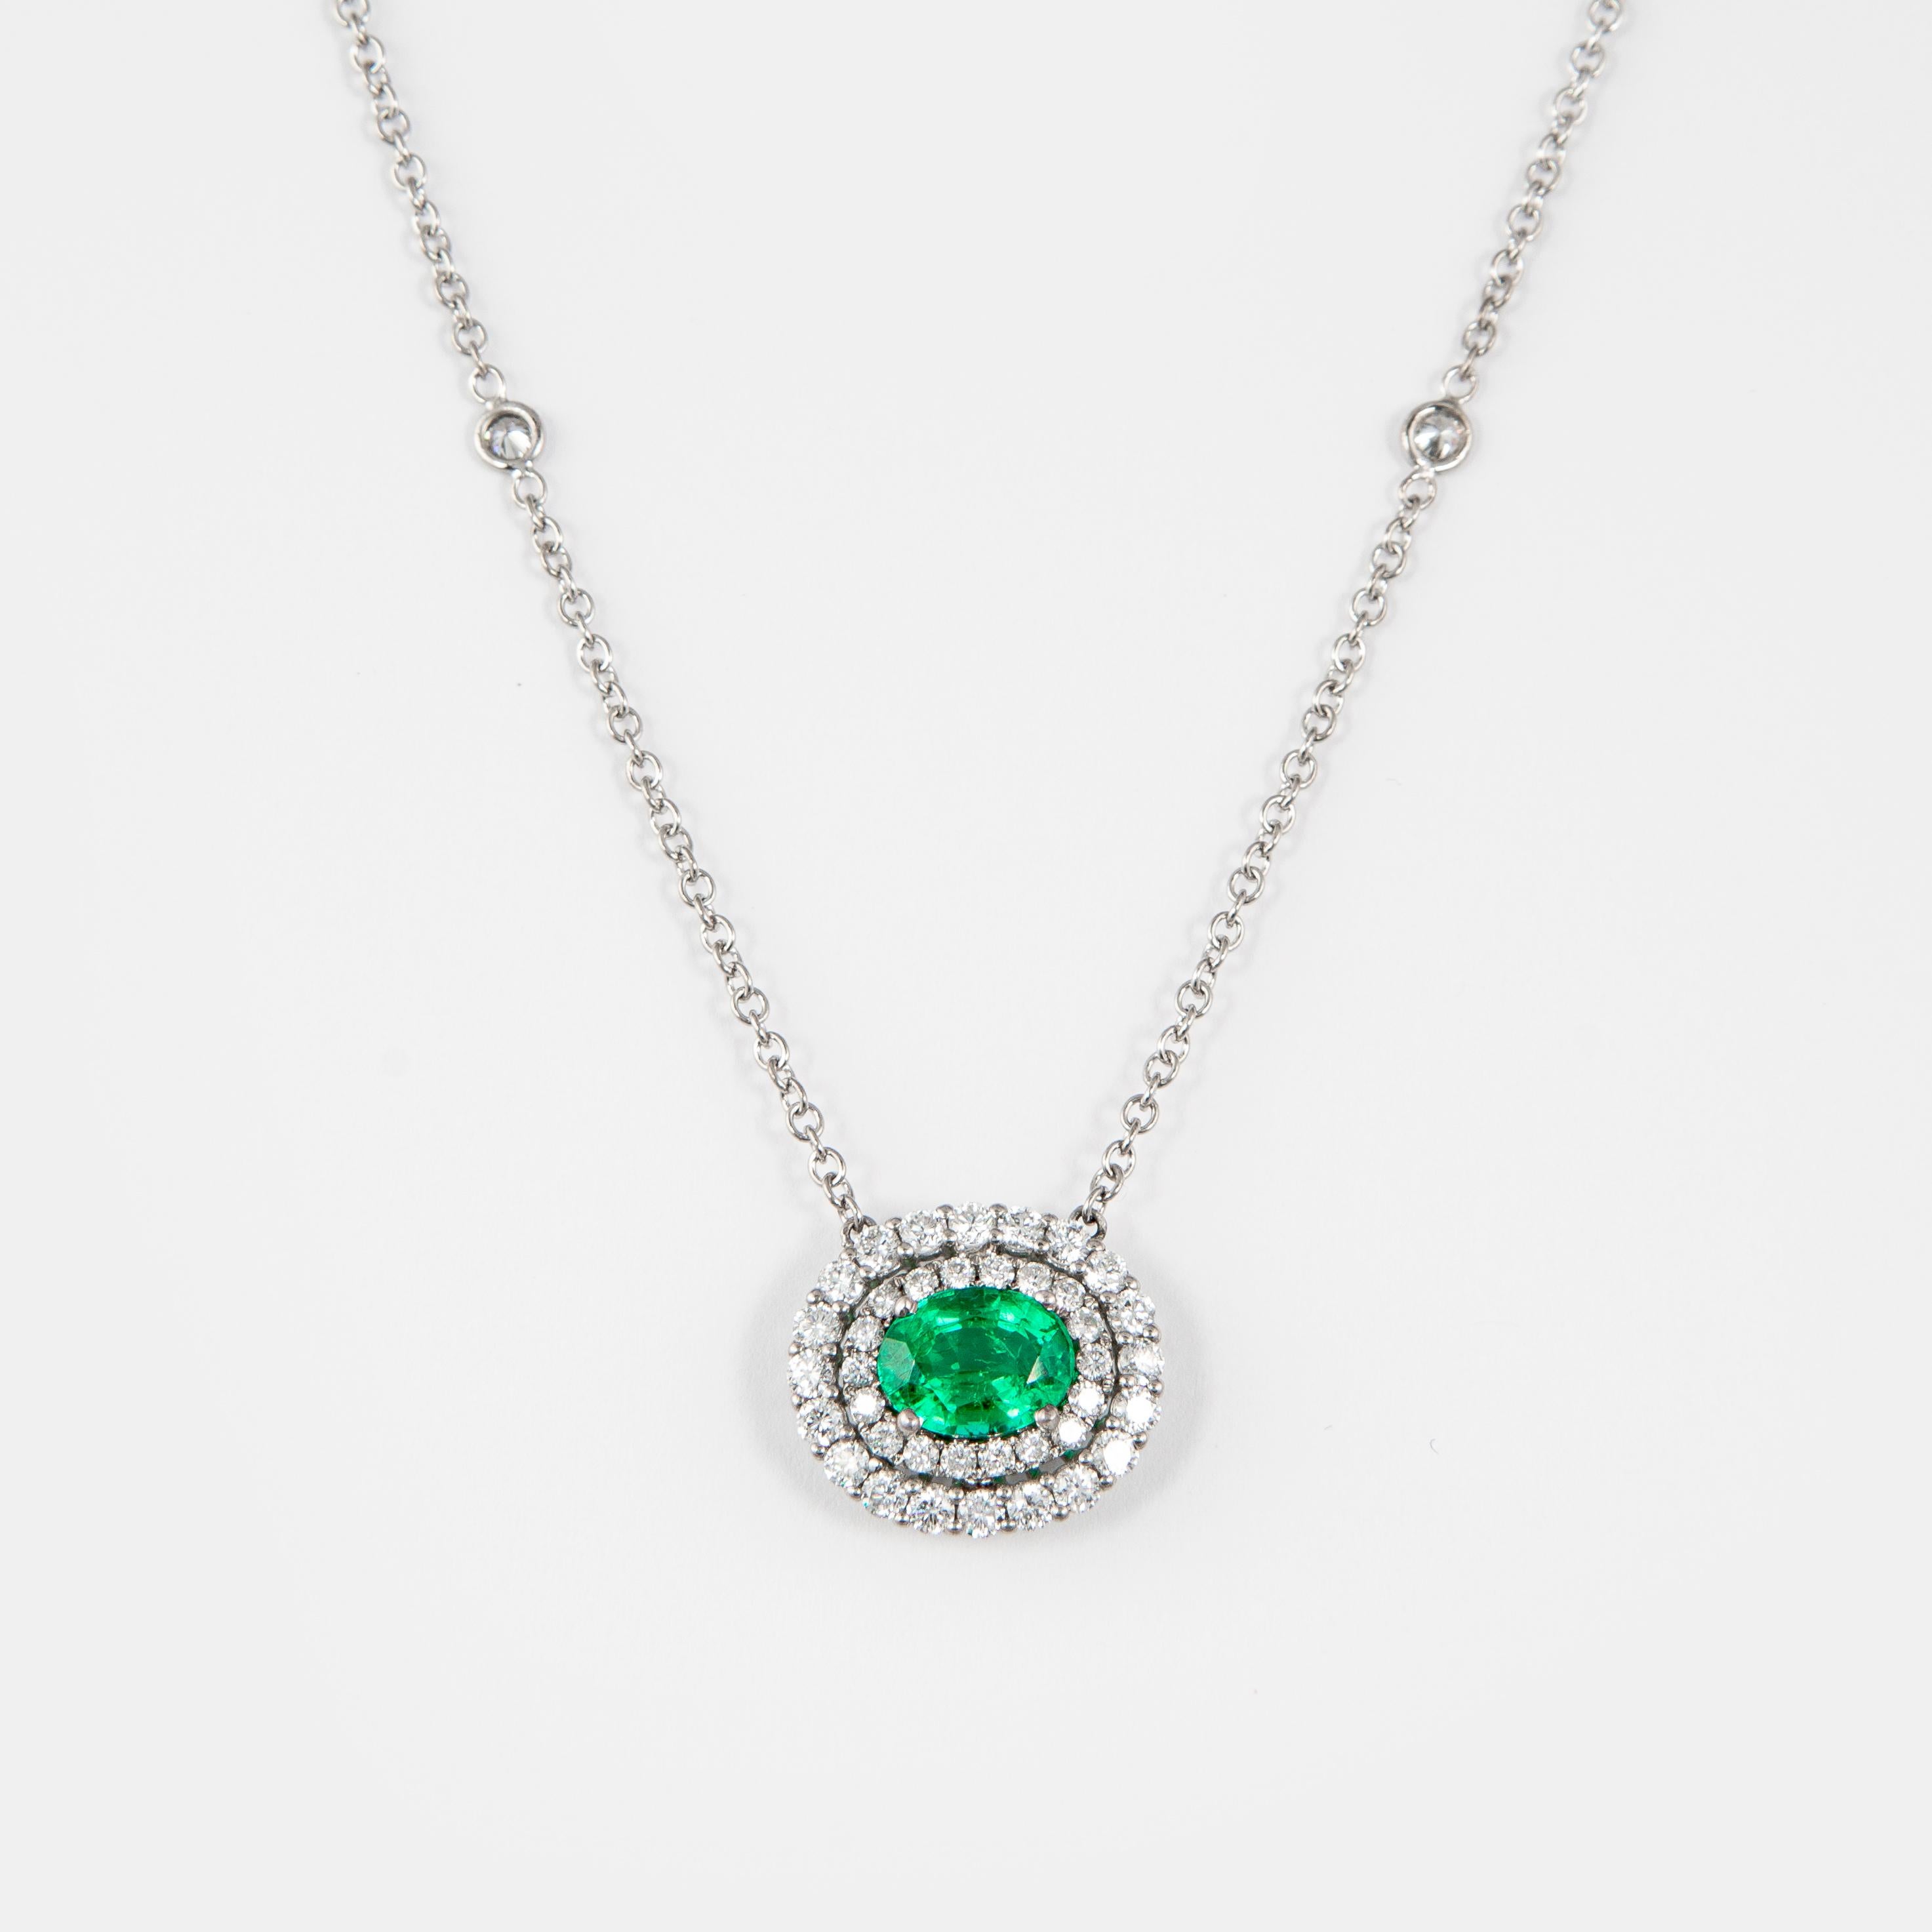 Contemporary Alexander 1.79ct Oval Emerald with Diamond Halo 18k White Gold Pendant Necklace